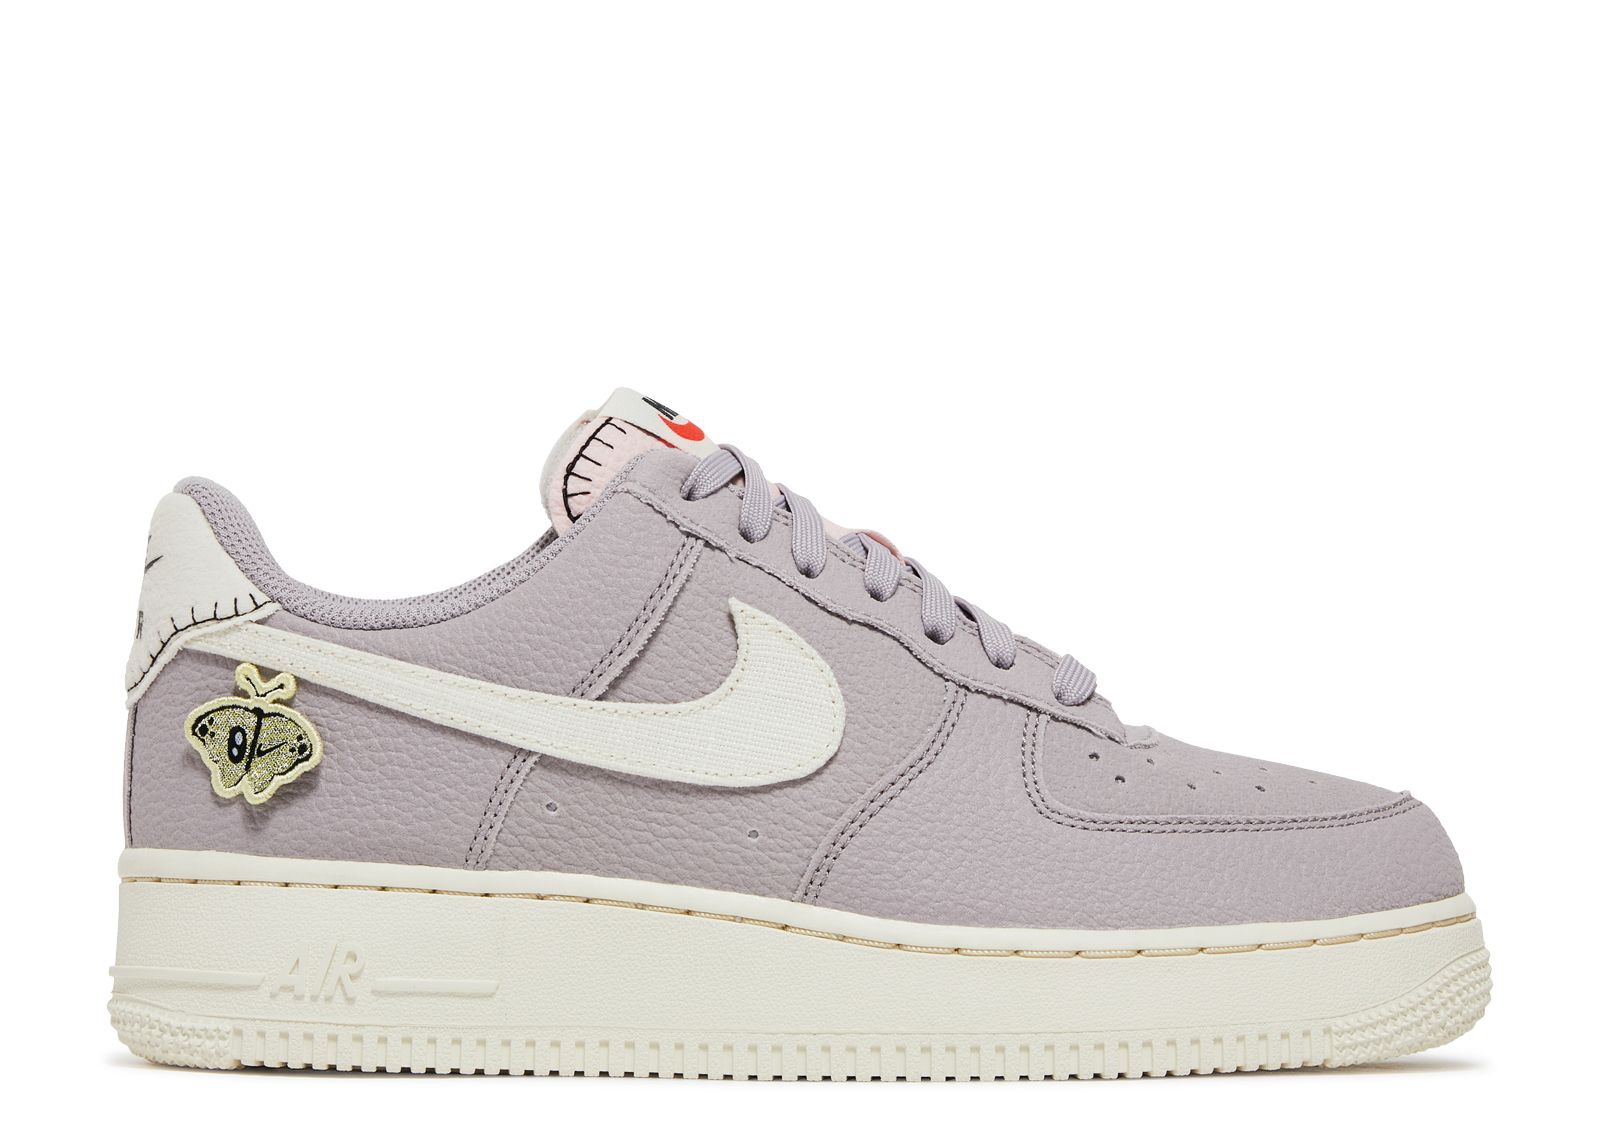 Nike Air Force 1 '07 LX - 9.5 / PALE IVORY in 2023